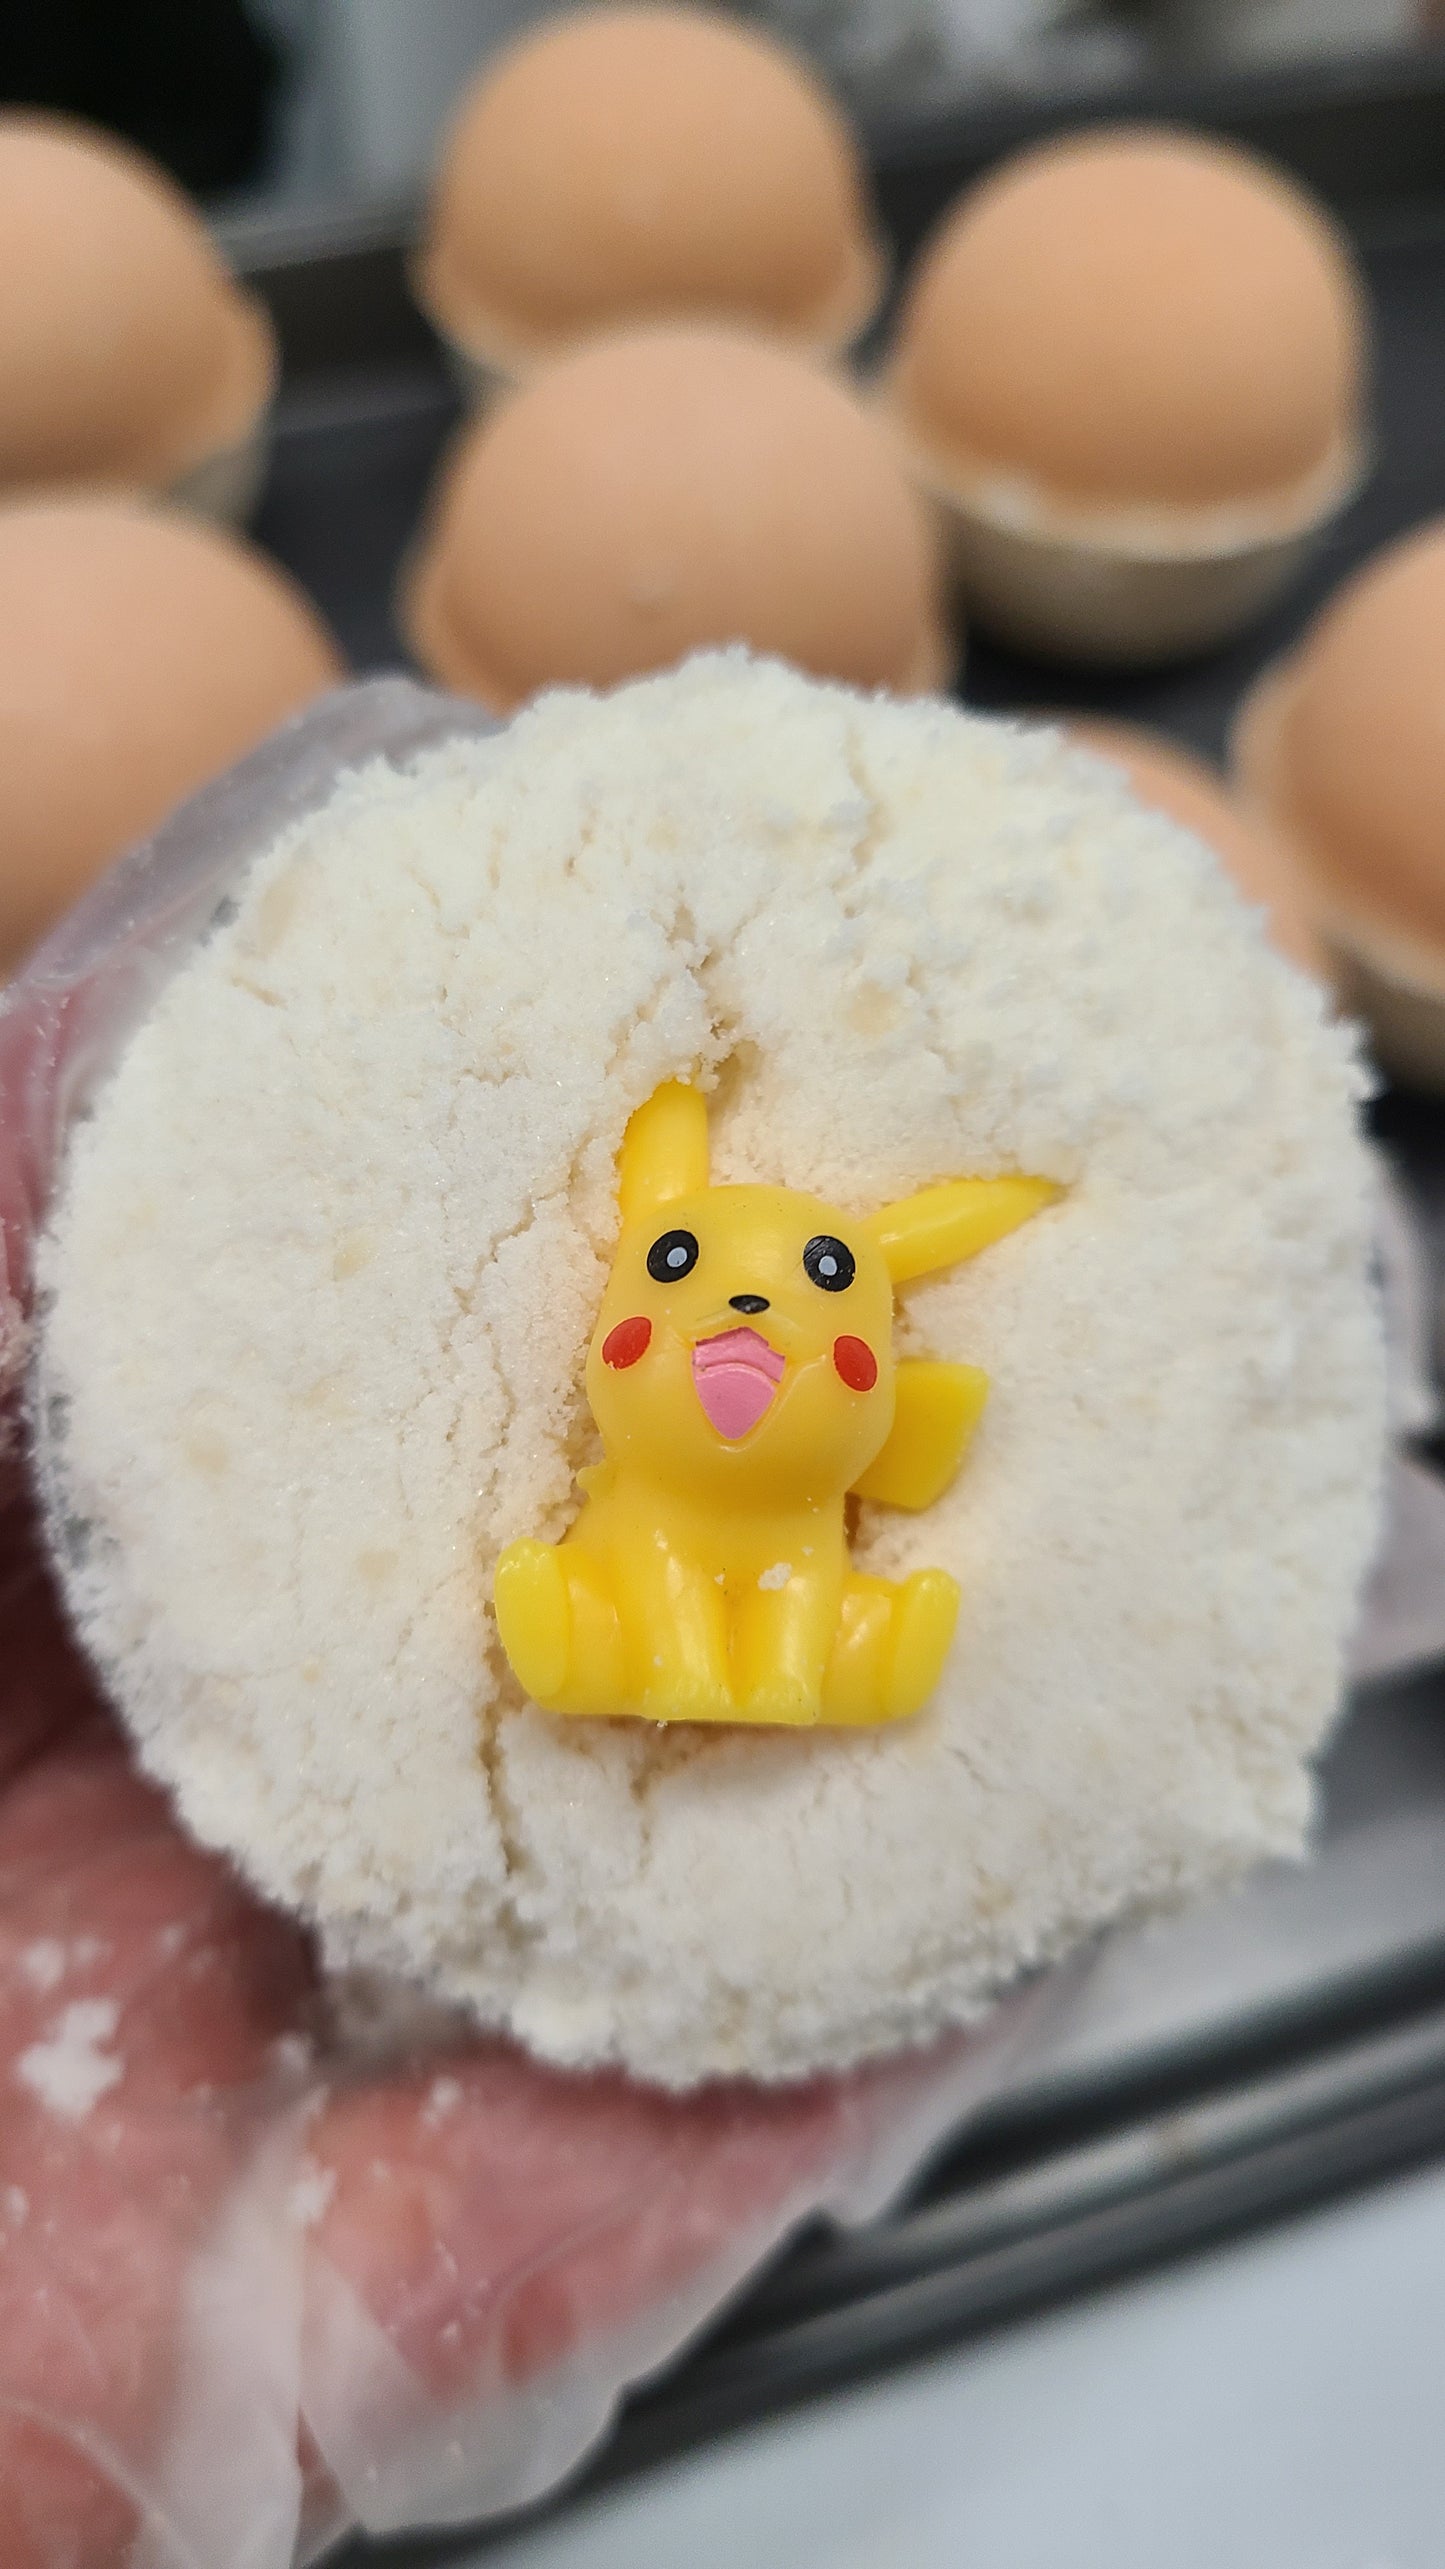 Bath bomb making for children  (Booking for March24)